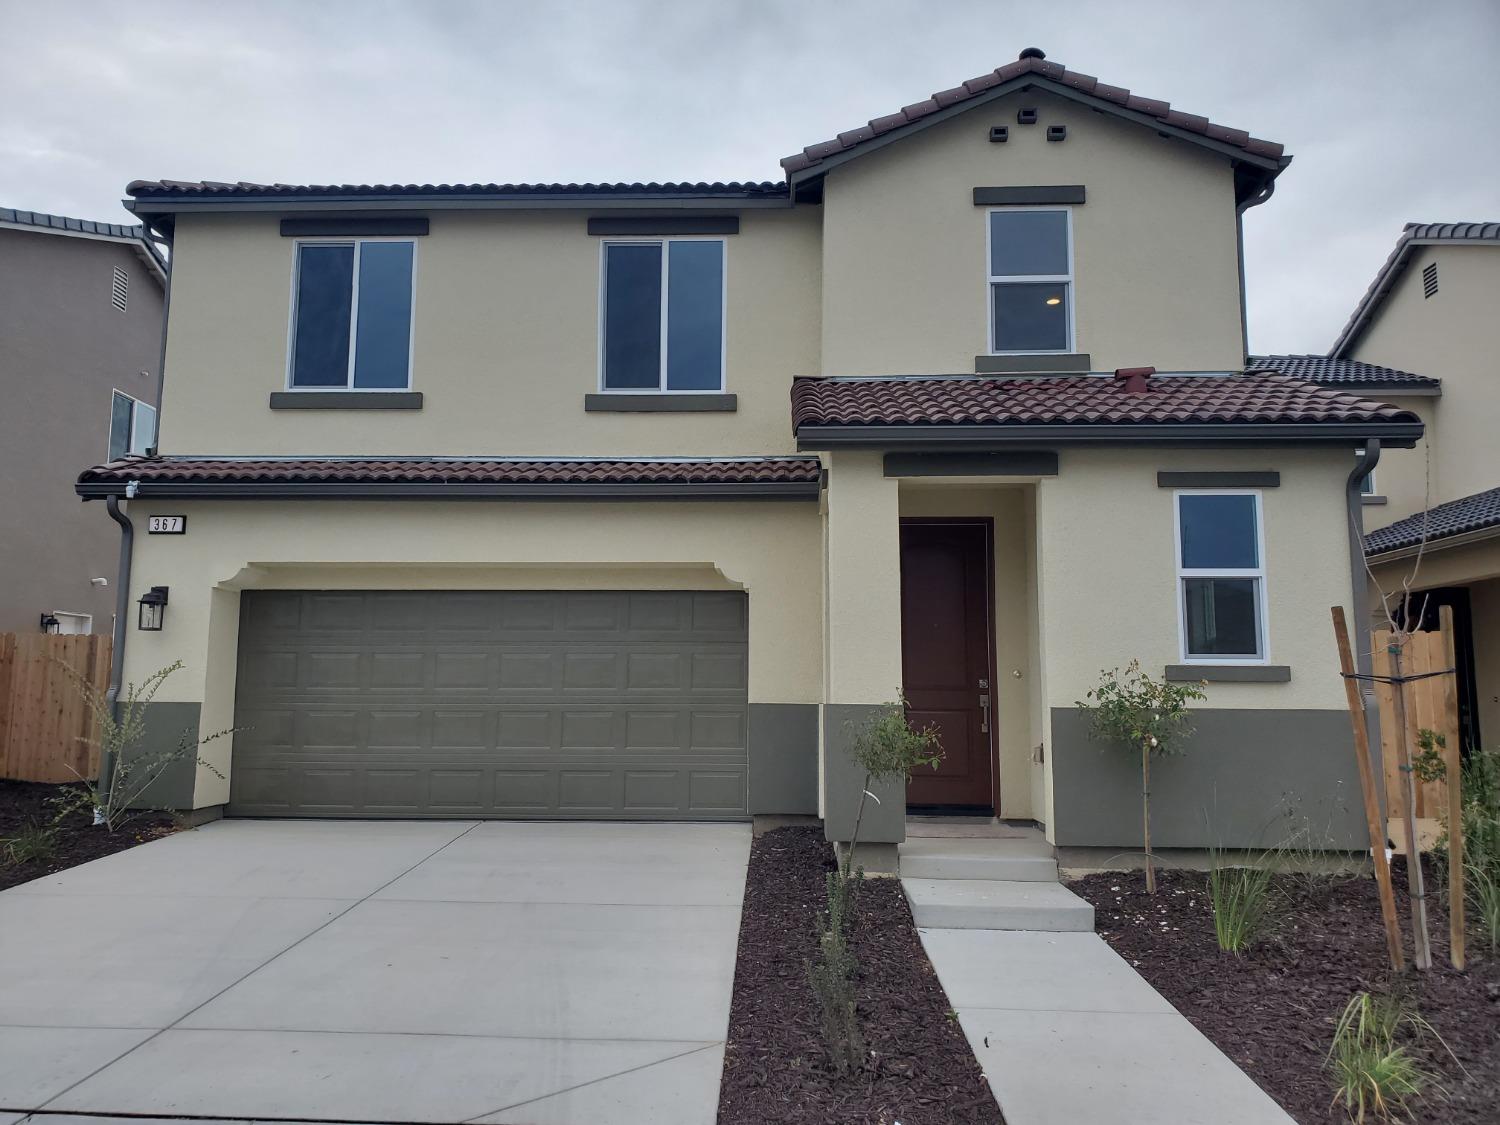 Photo of 367 Talus Wy in Madera, CA